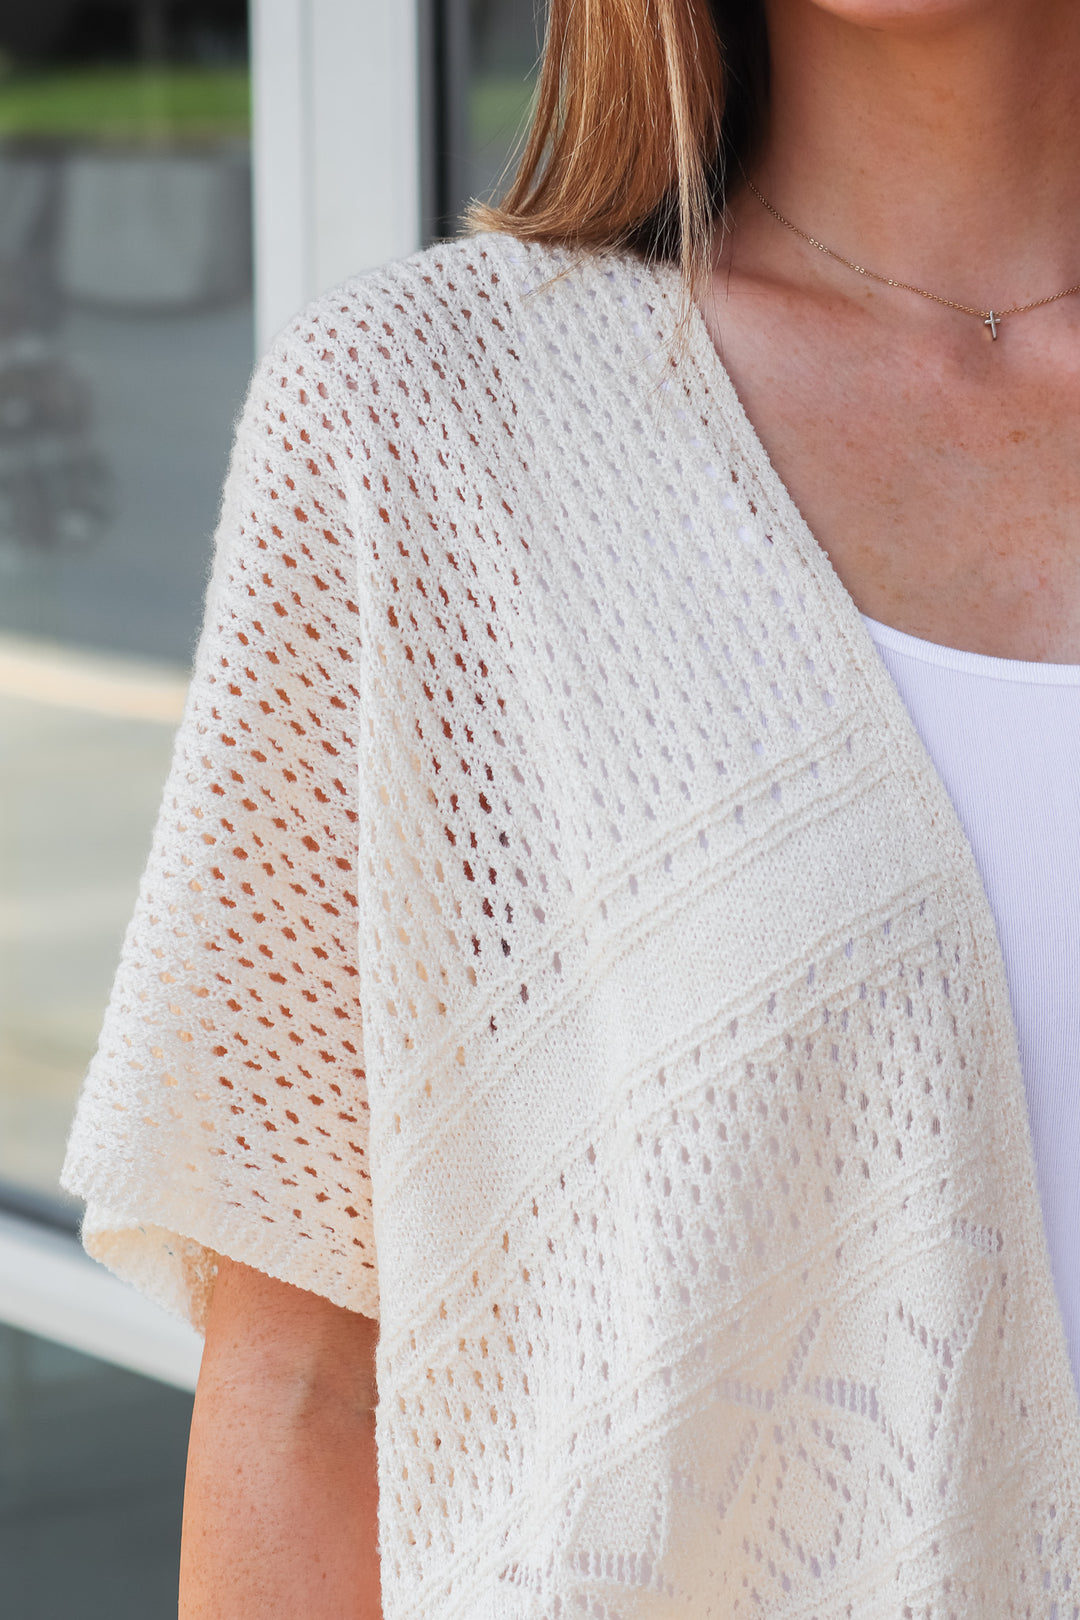 A closeup of a woman wearing a cream colored crochet sweater.